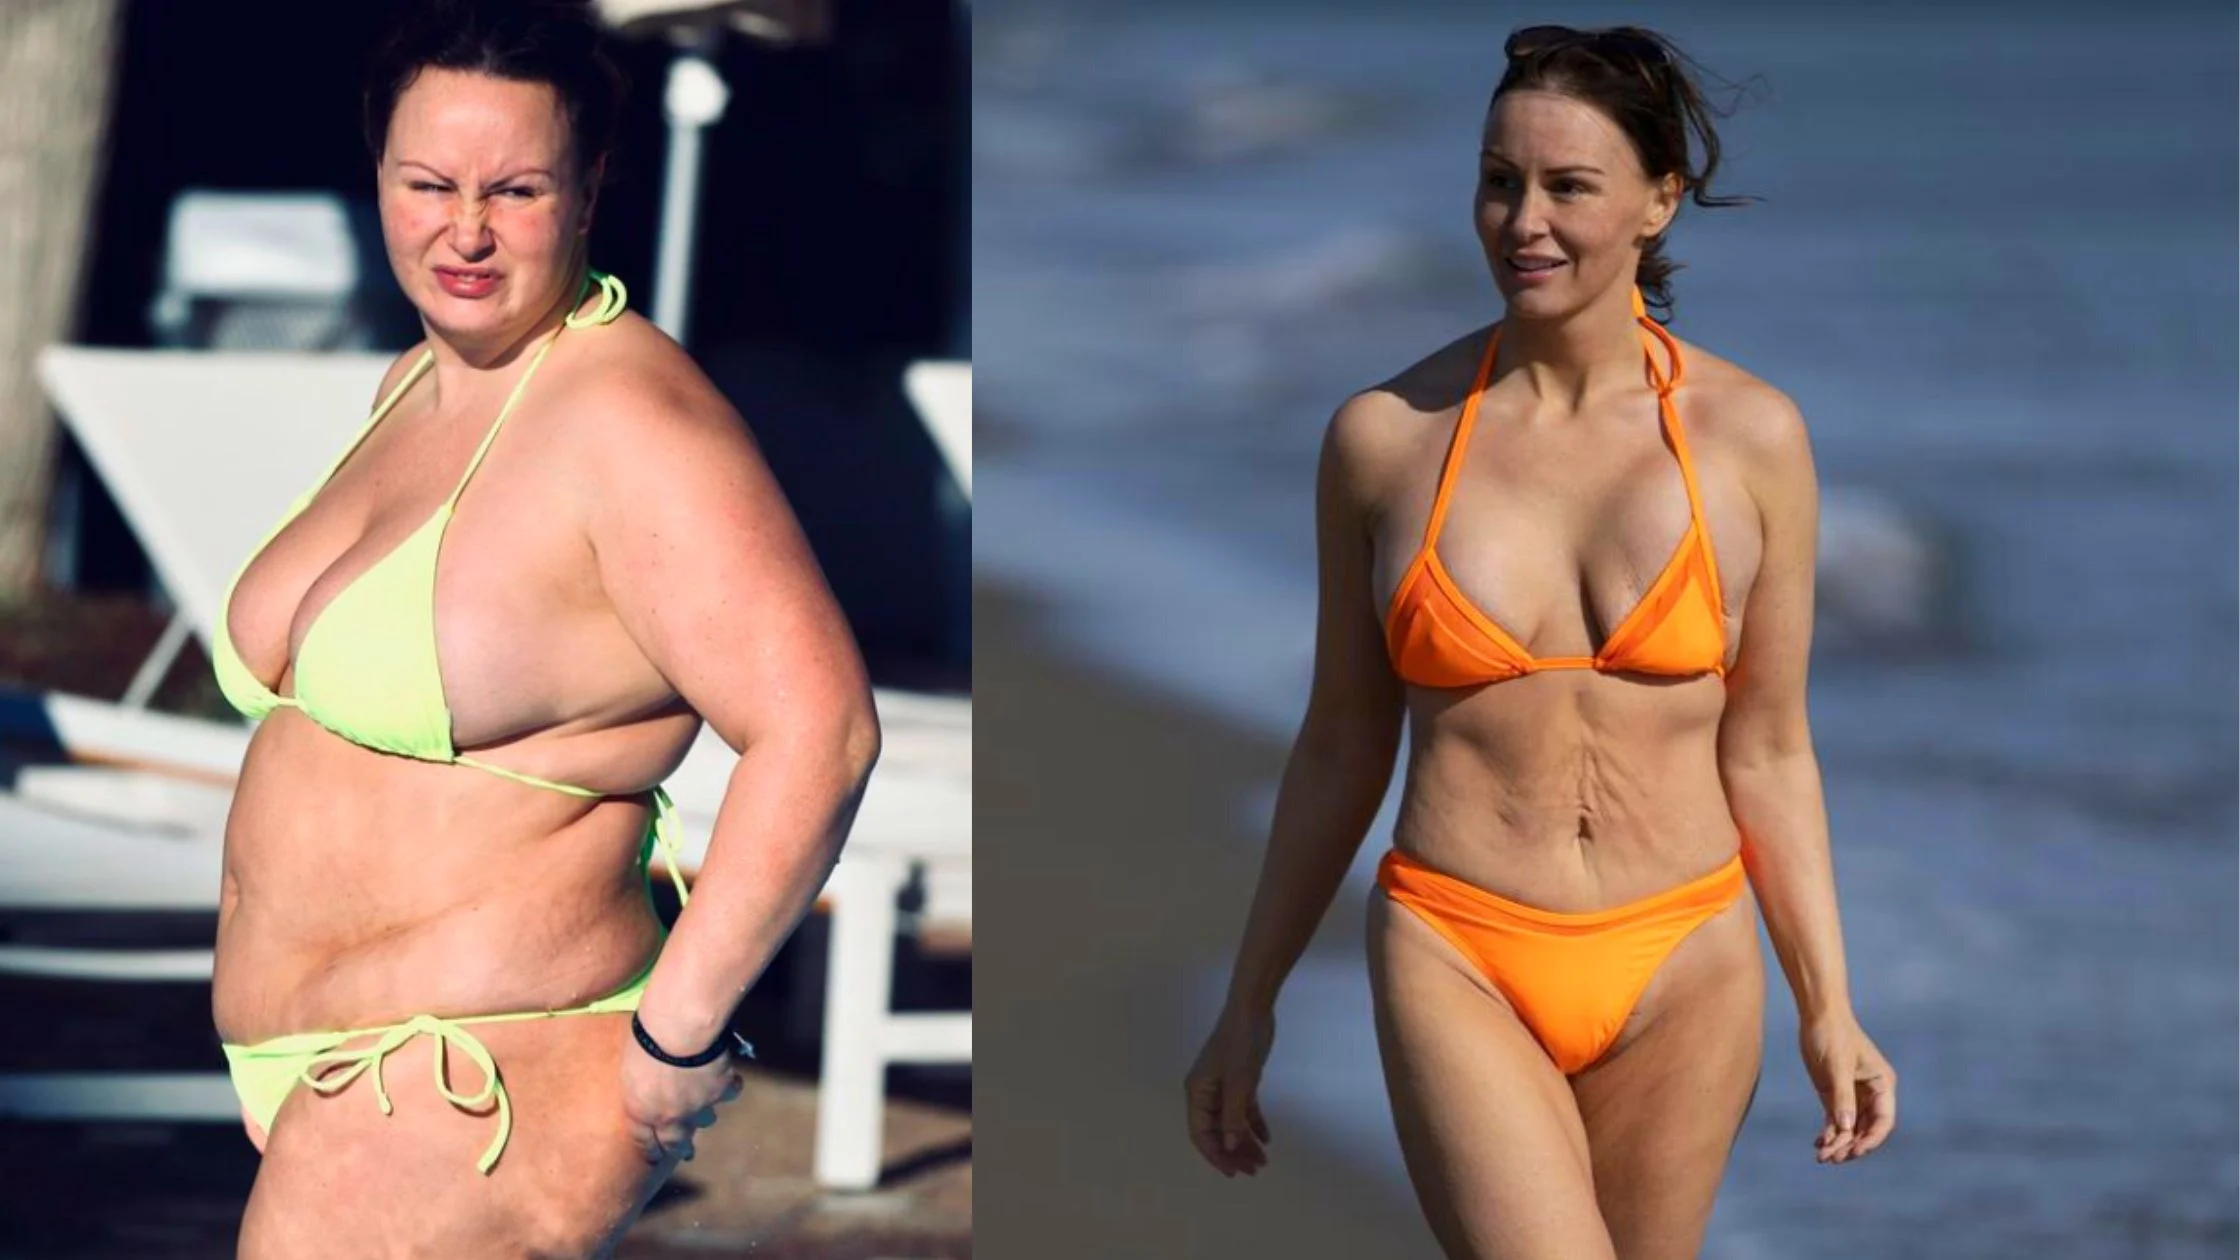 Chanelle Hayes weight loss